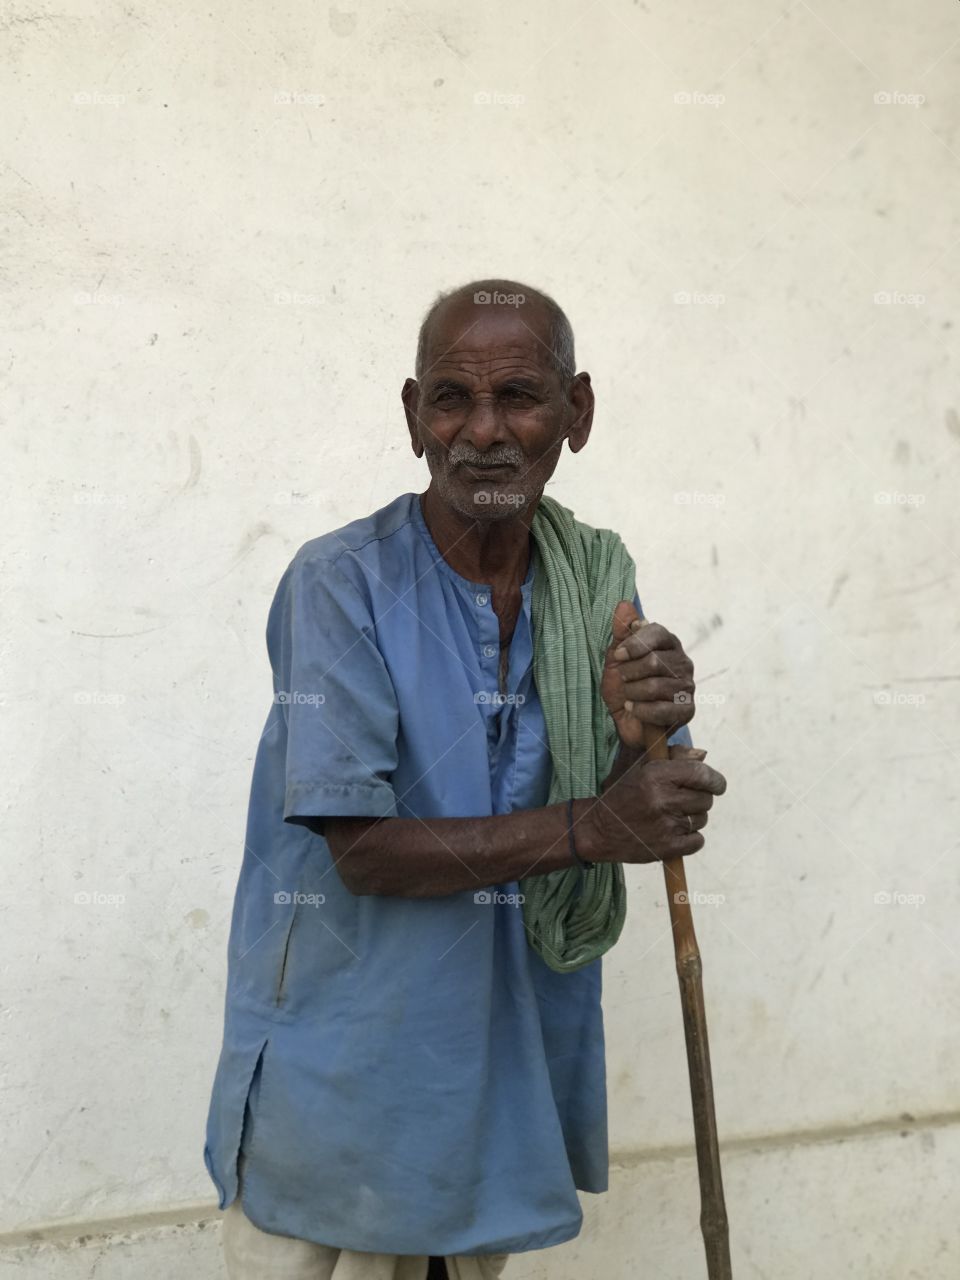 The old man is still working , as I want to tell this man once was taking care of my grandfather in late 50s now he is 90 something still fine and enjoying life . This is what u say AN INCREDIBLE INDIA 